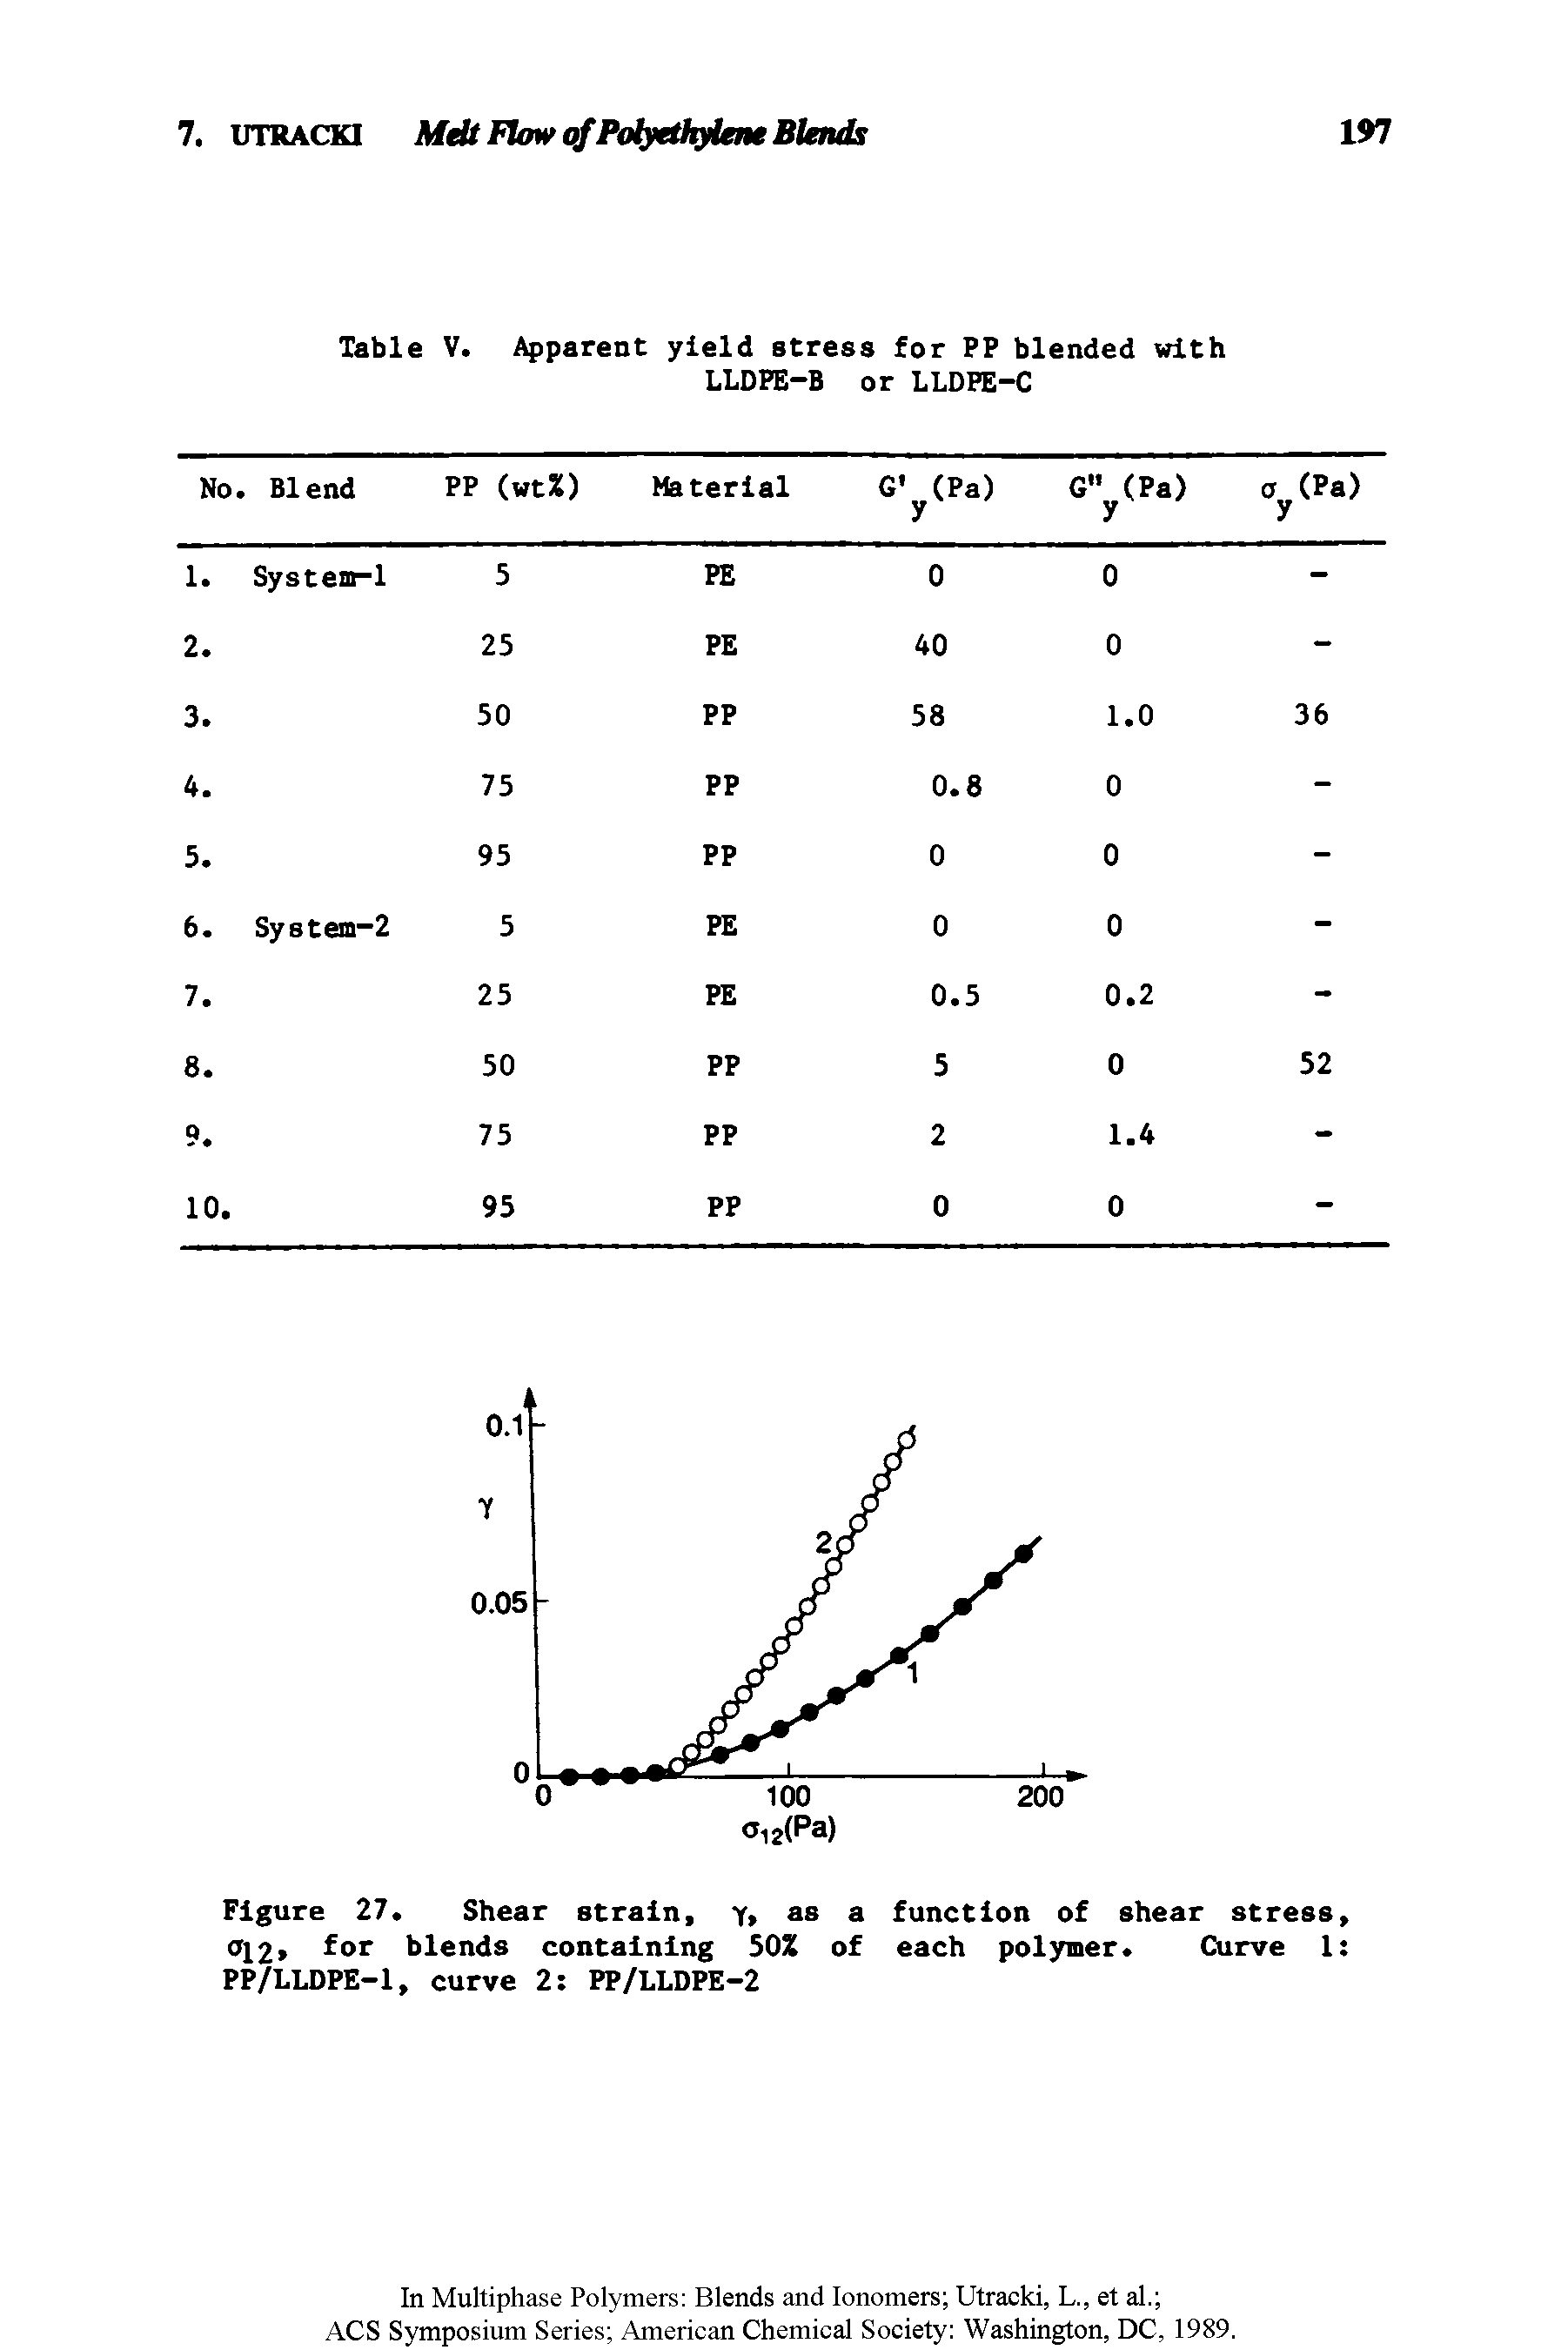 Table V. Apparent yield stress for PP blended with LLDPE-B or LLDPE-C...